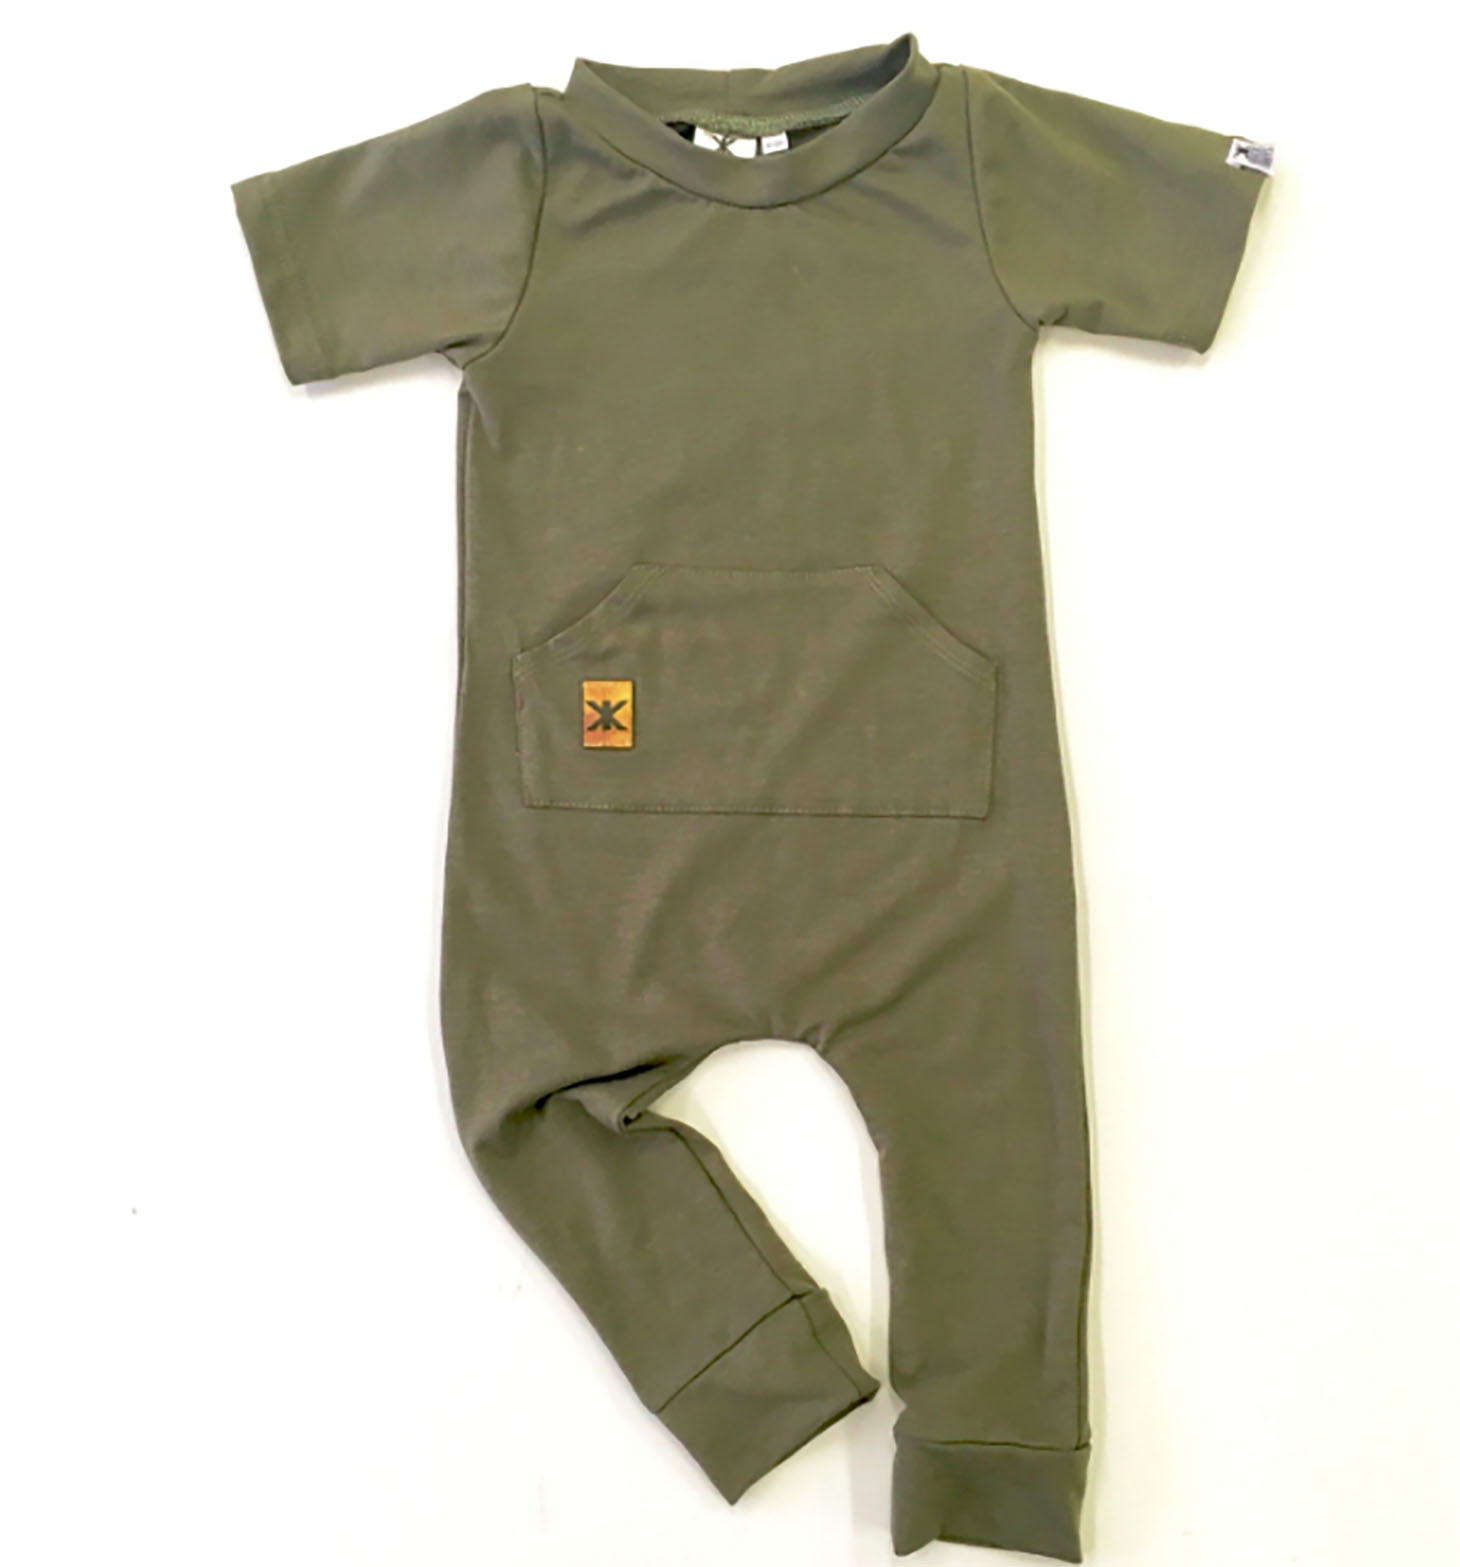 cute baby boy outfits canada